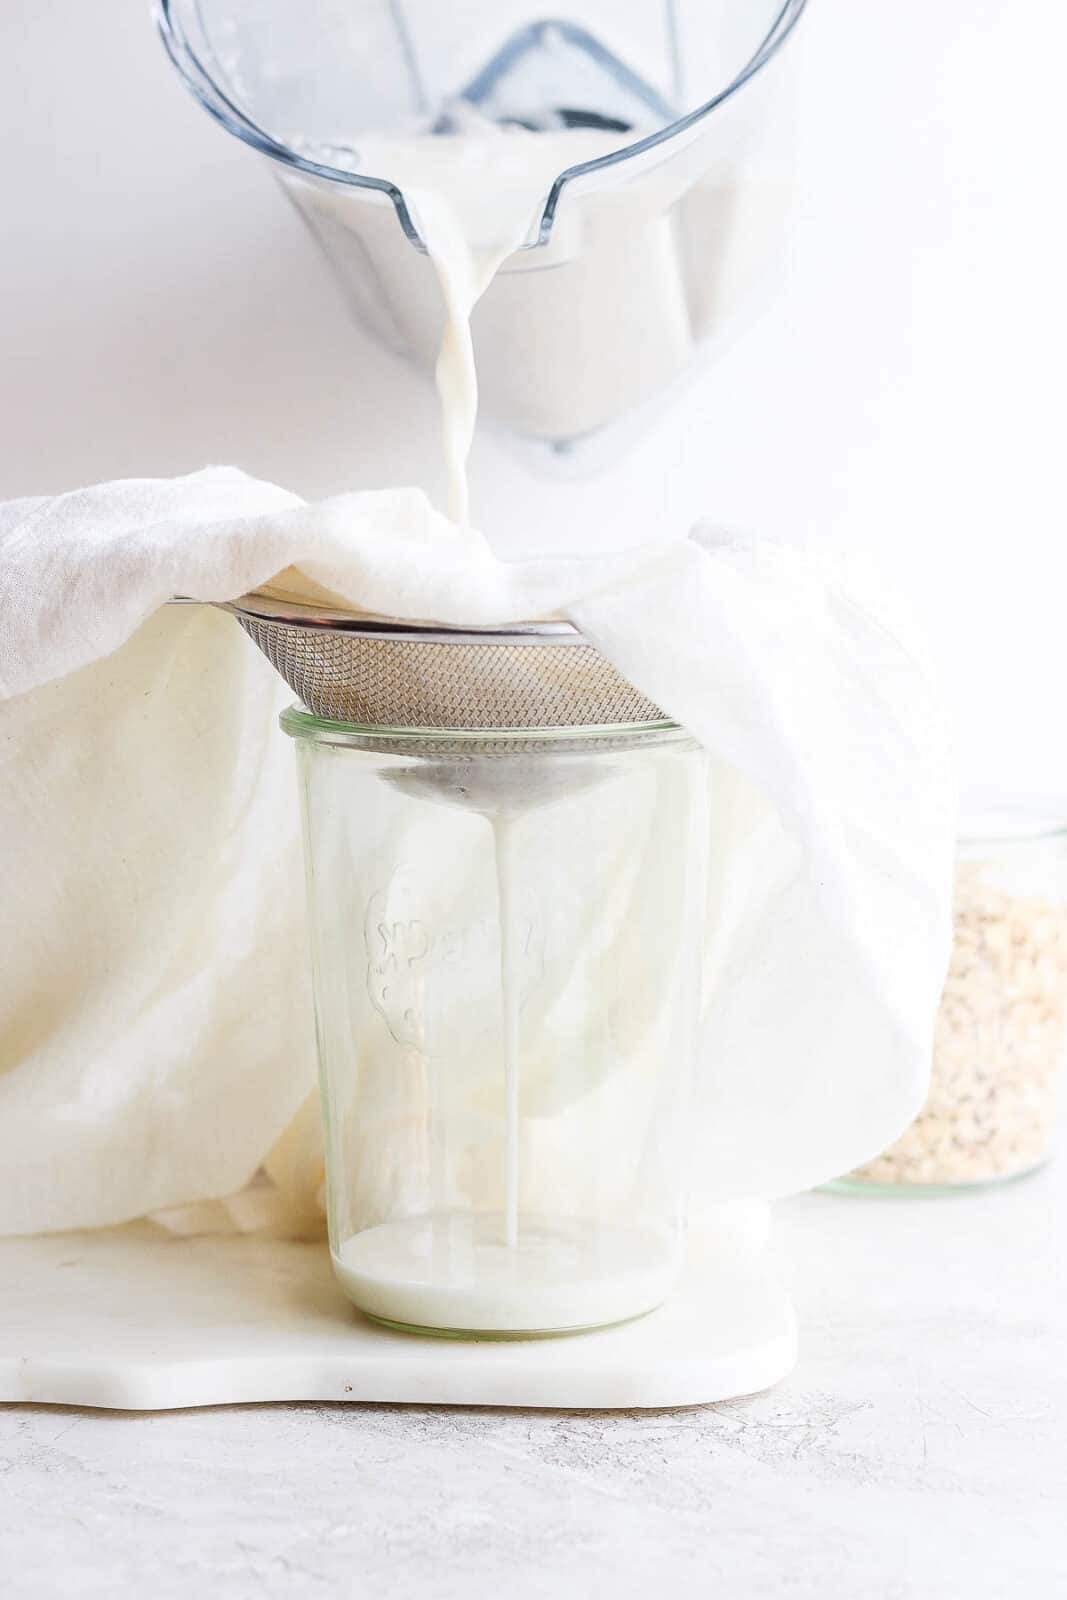 Pouring oat milk from the blender, through a cheesecloth, and into a mason jar.